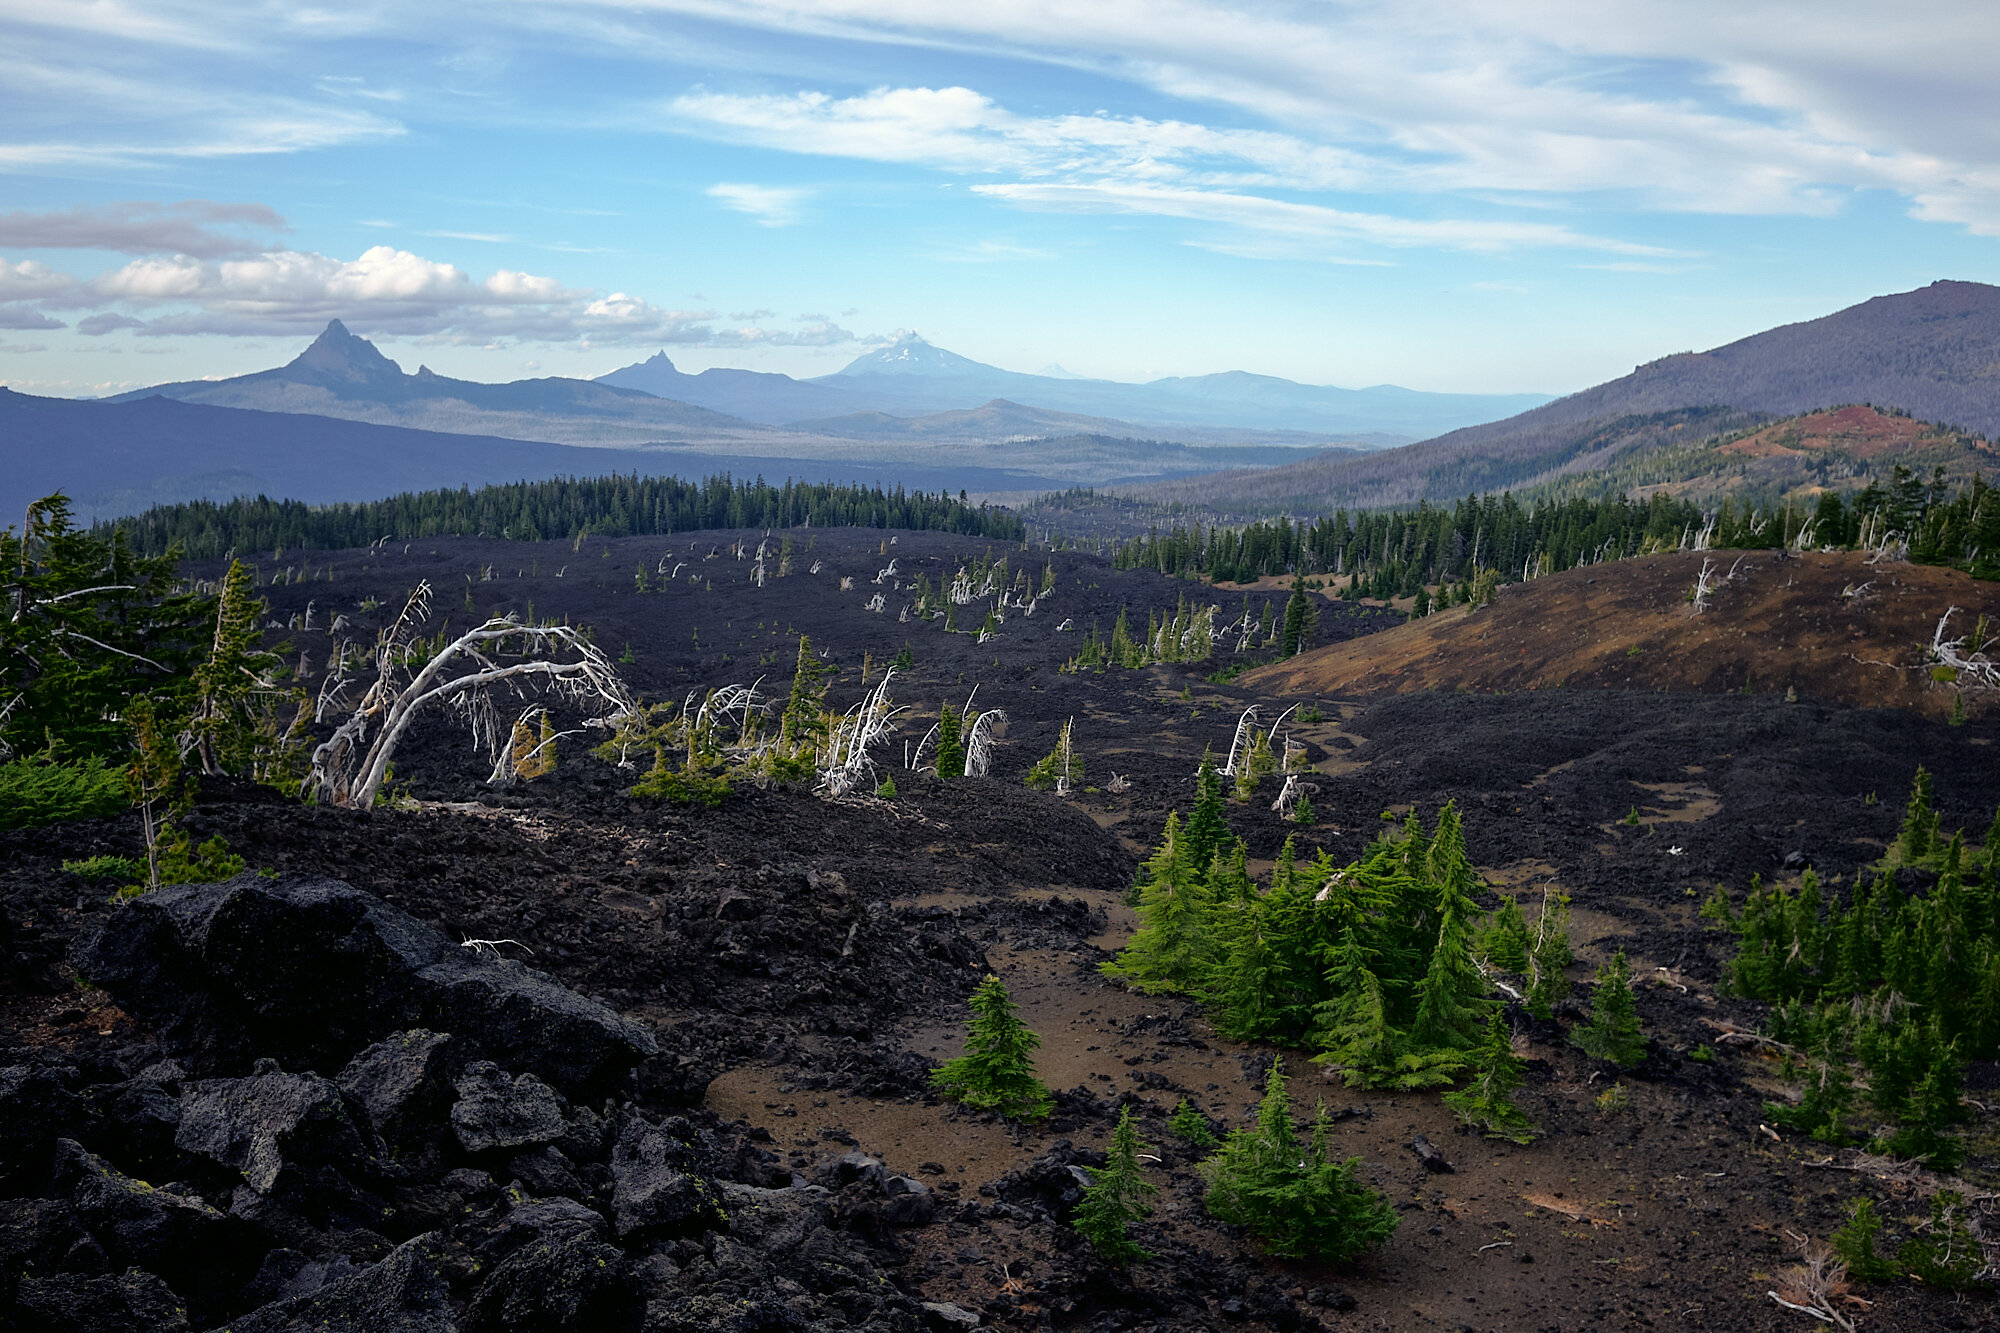  Hiking to camp through the lava fields below North Sister. From front to back are Mt. Washingotn, Three Fingered Jack, Mt. Jefferson and Mt. Hood. | 9/3/19 Mile 1,977.2, 6,277' 